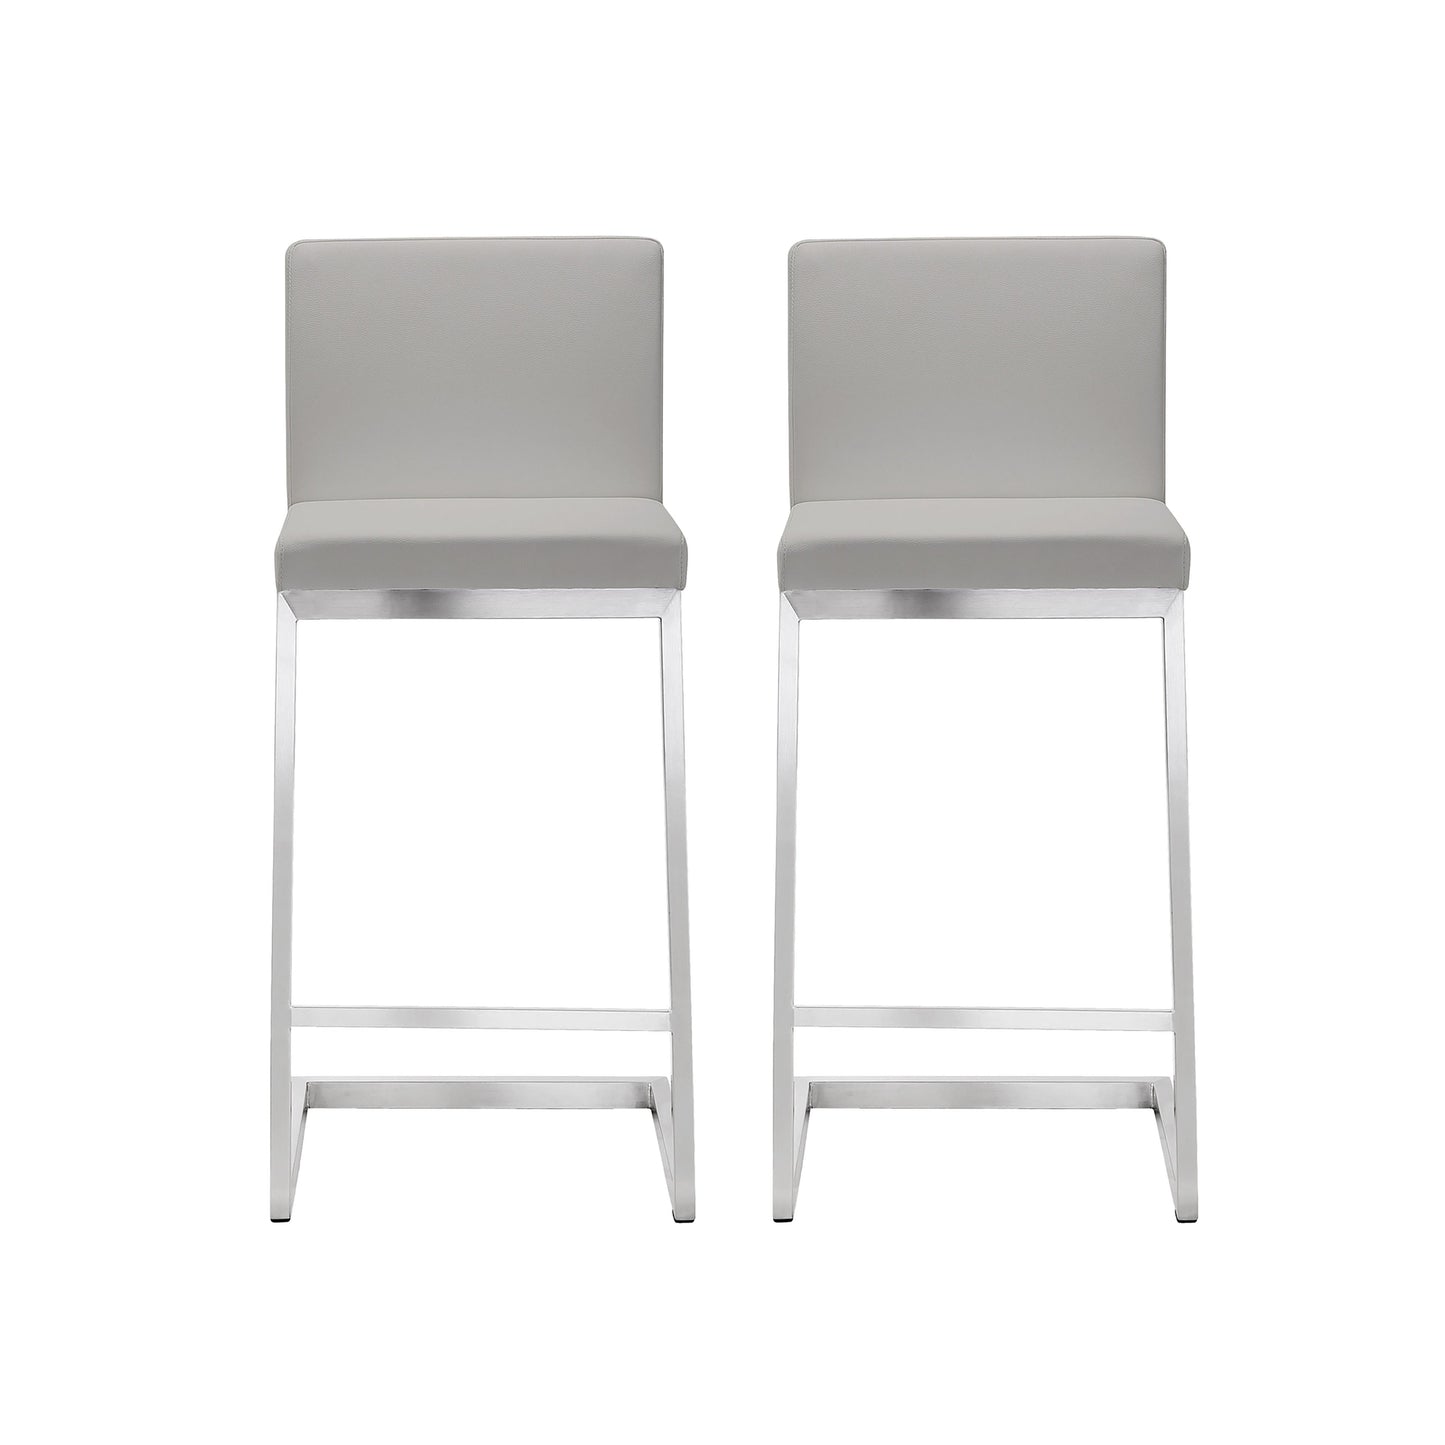 Parma Light Grey Stainless Steel Counter Stool Set Of 2 by TOV